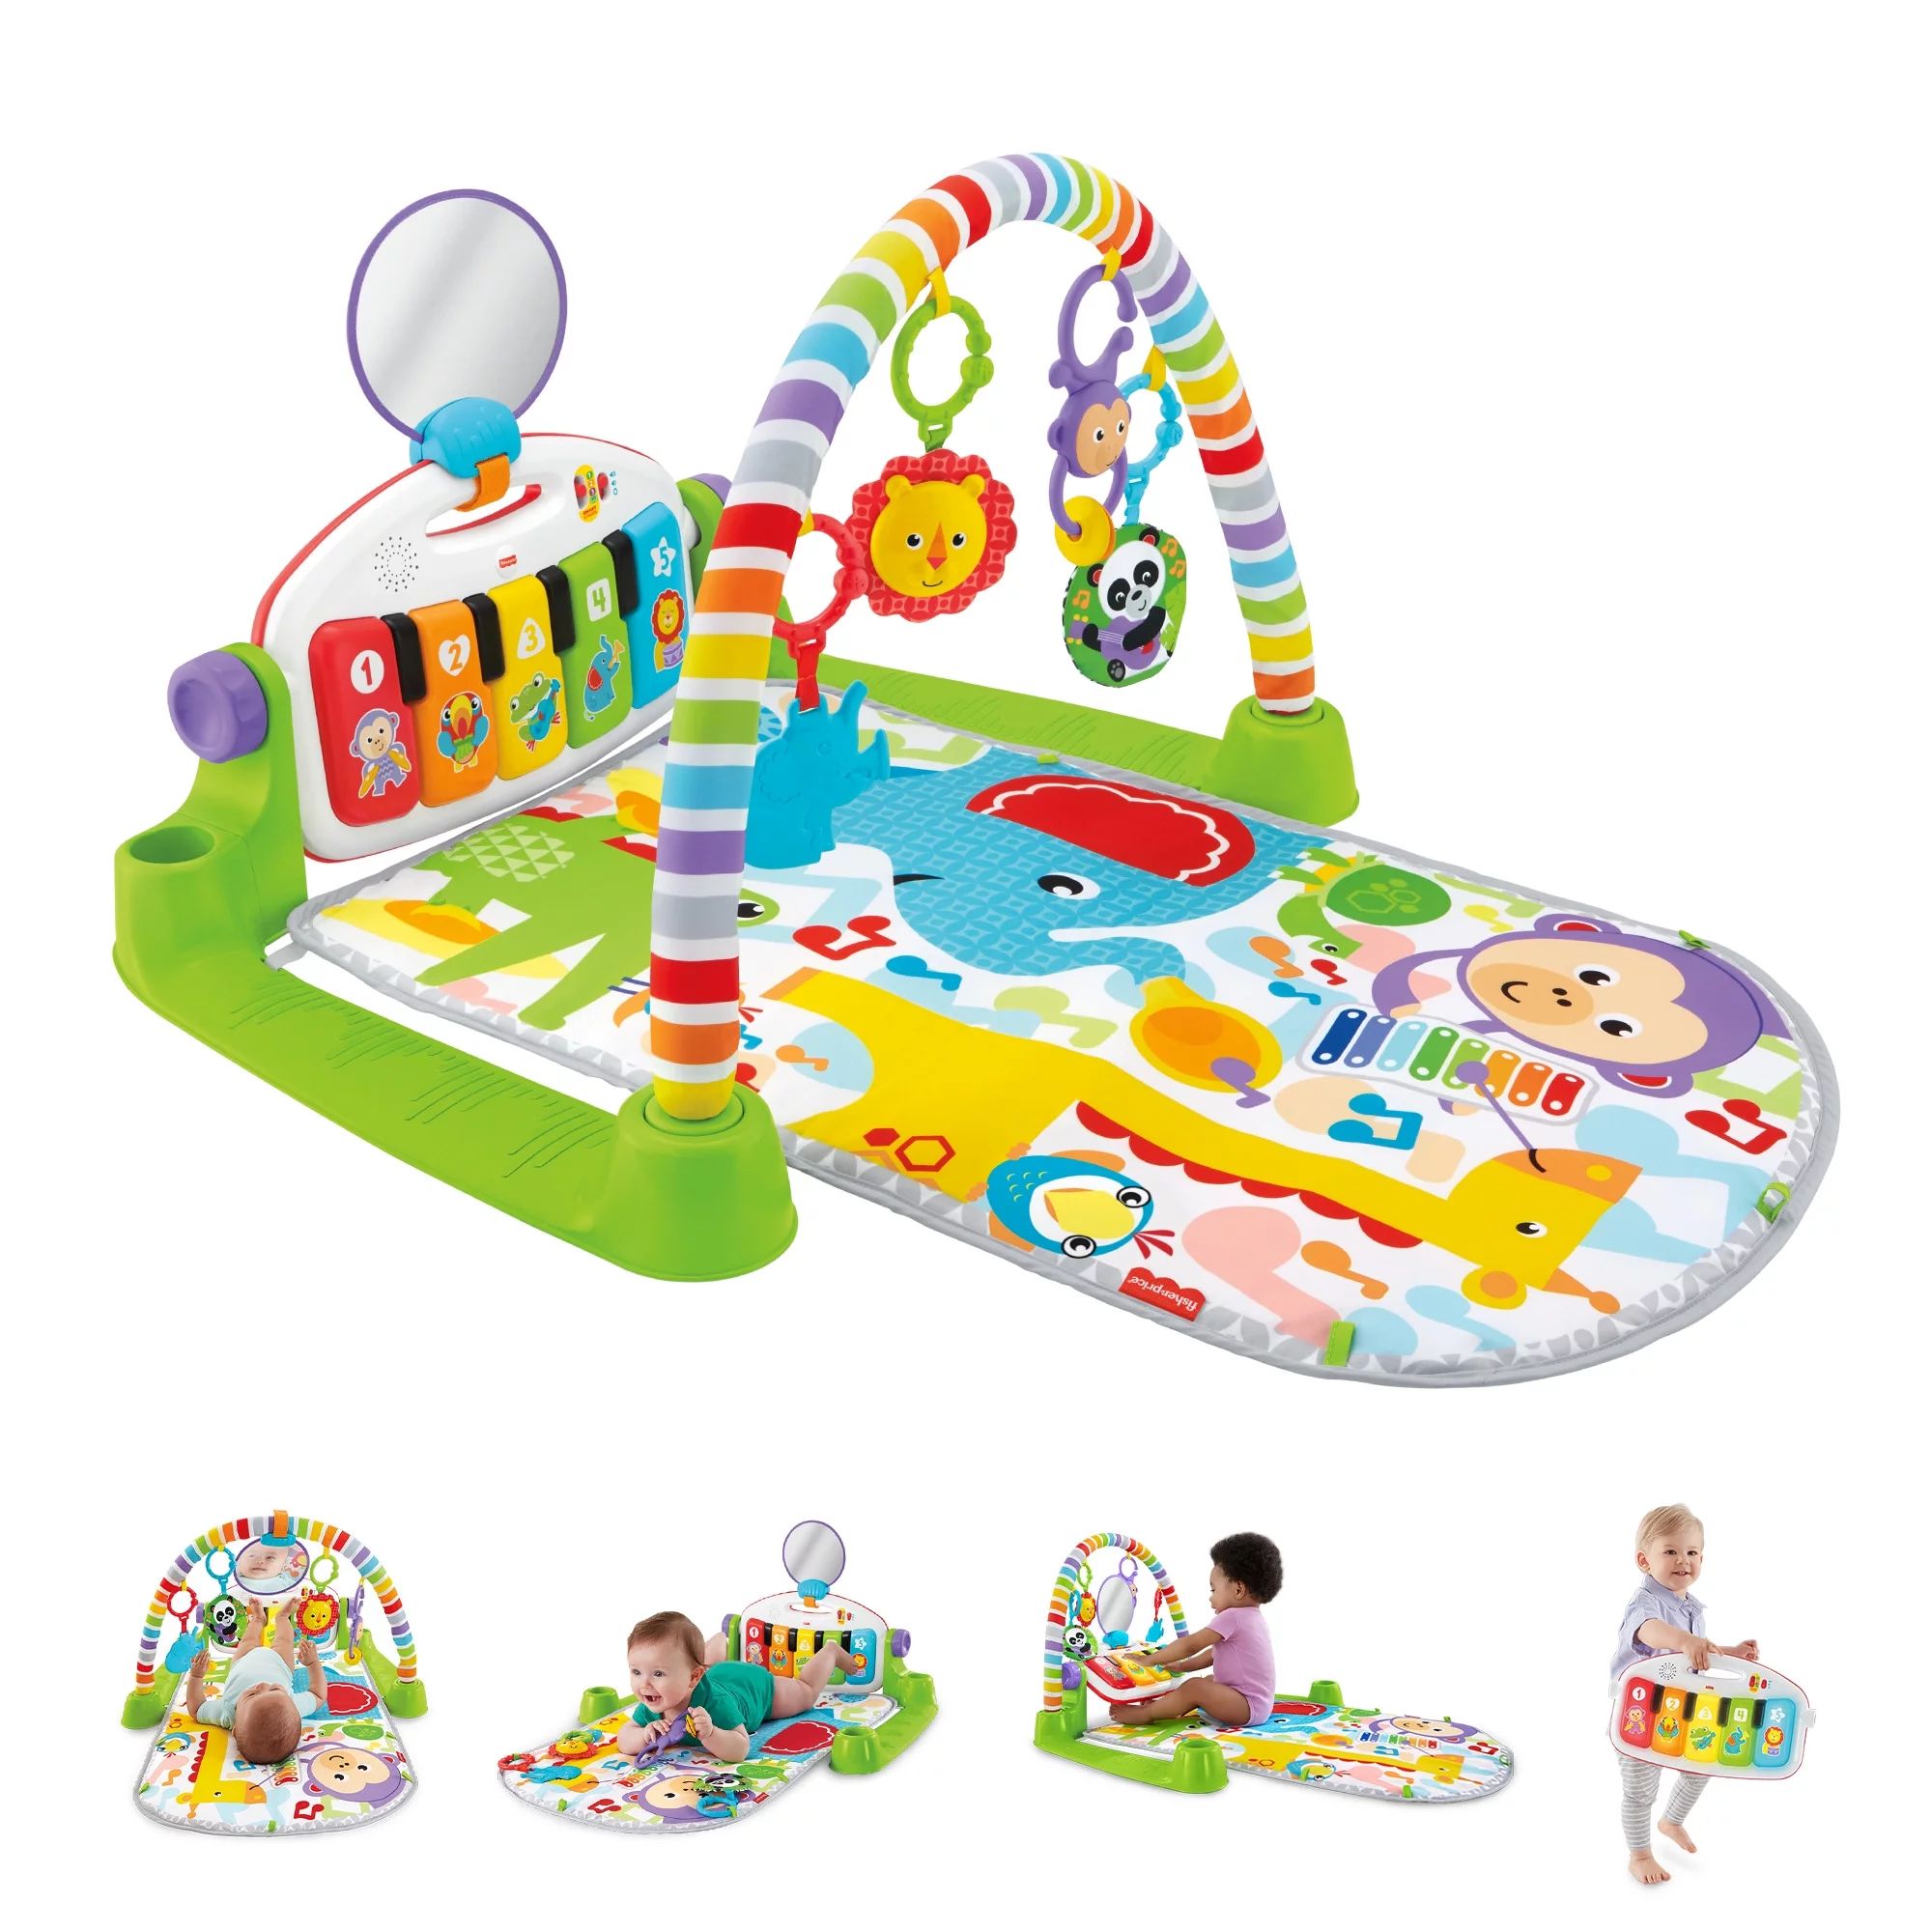 Fisher-Price Deluxe Kick & Play Piano Gym Infant Playmat with Electronic Learning Toy, Green | Walmart (US)